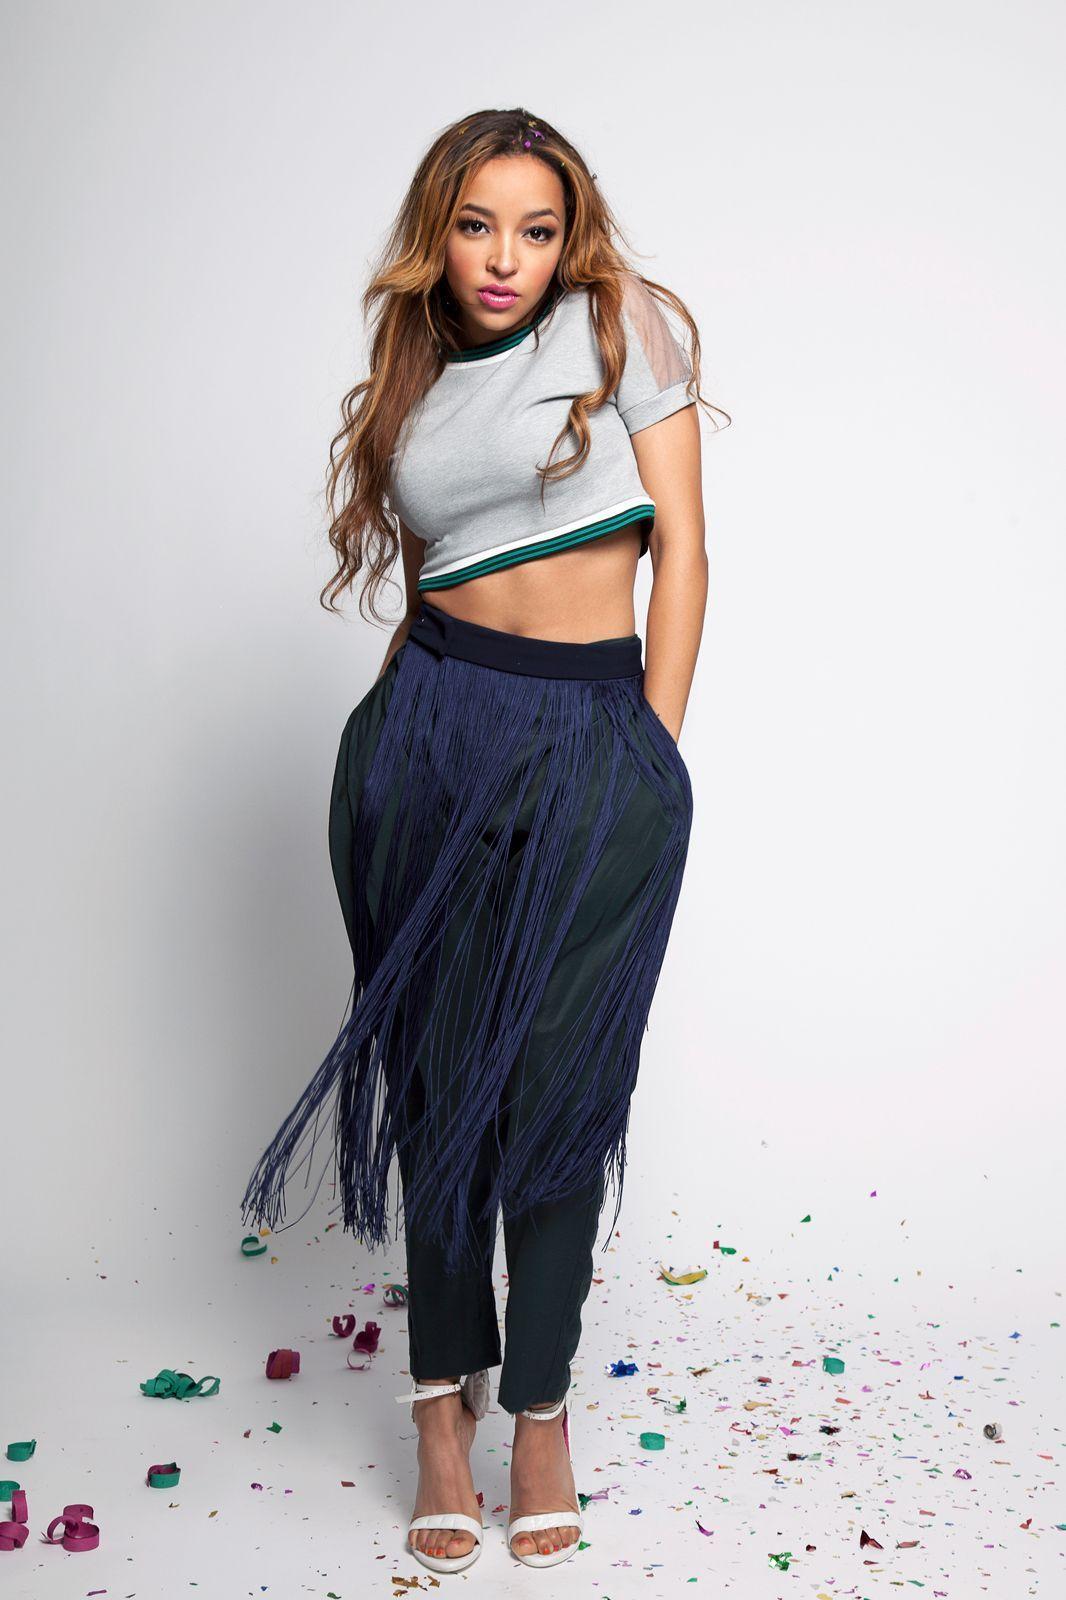 Artist To Watch - Tinashe Future , HD Wallpaper & Backgrounds